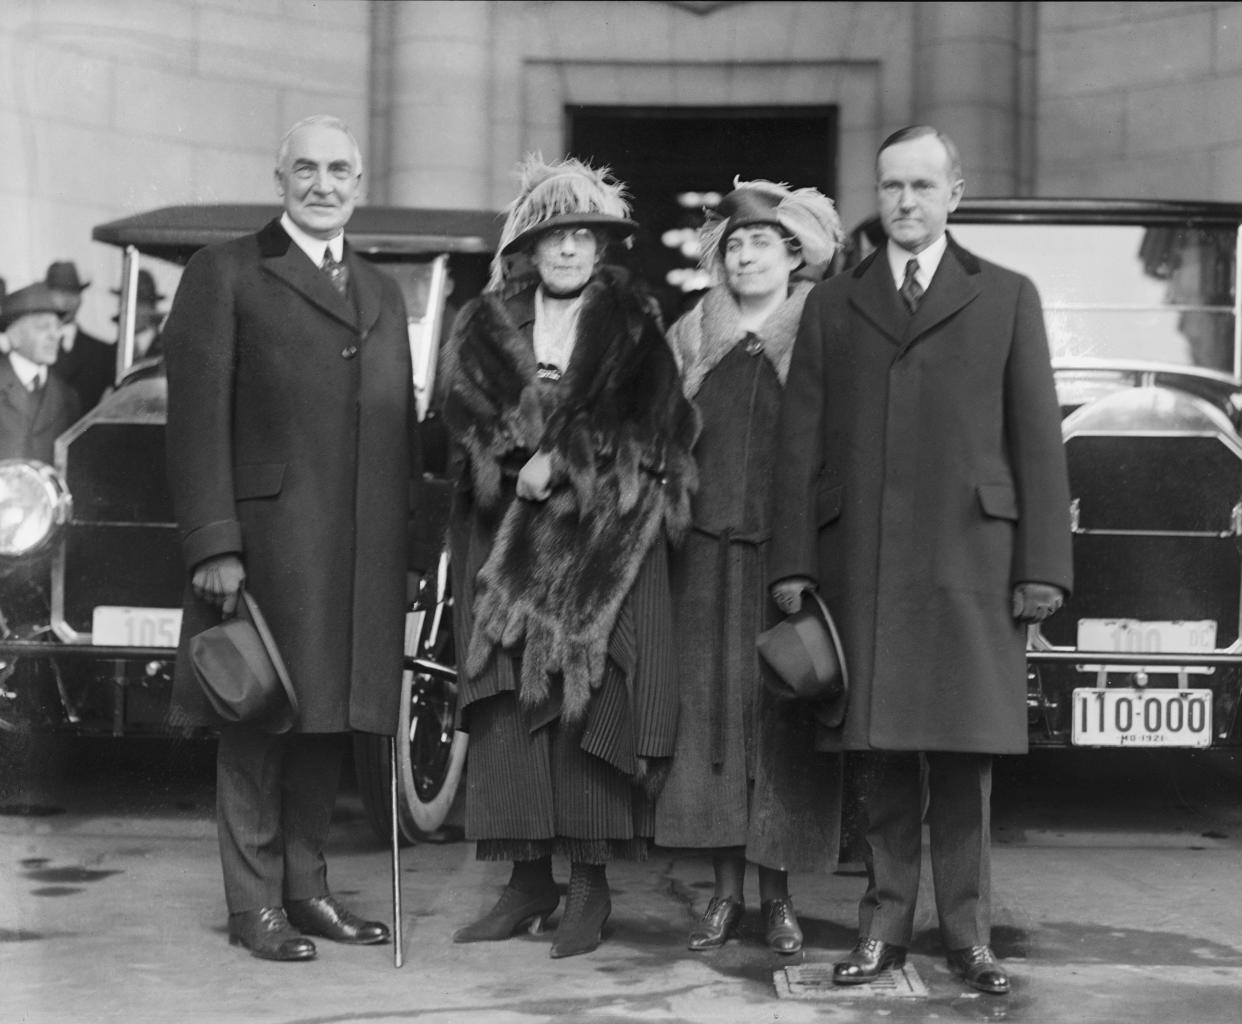 (Left to right) Warren G. Harding, wife Florence Harding, Grace Coolidge and husband Calvin Coolidge arrive at the 1921 inauguration. Harding was sworn in as president, Coolidge as vice president.